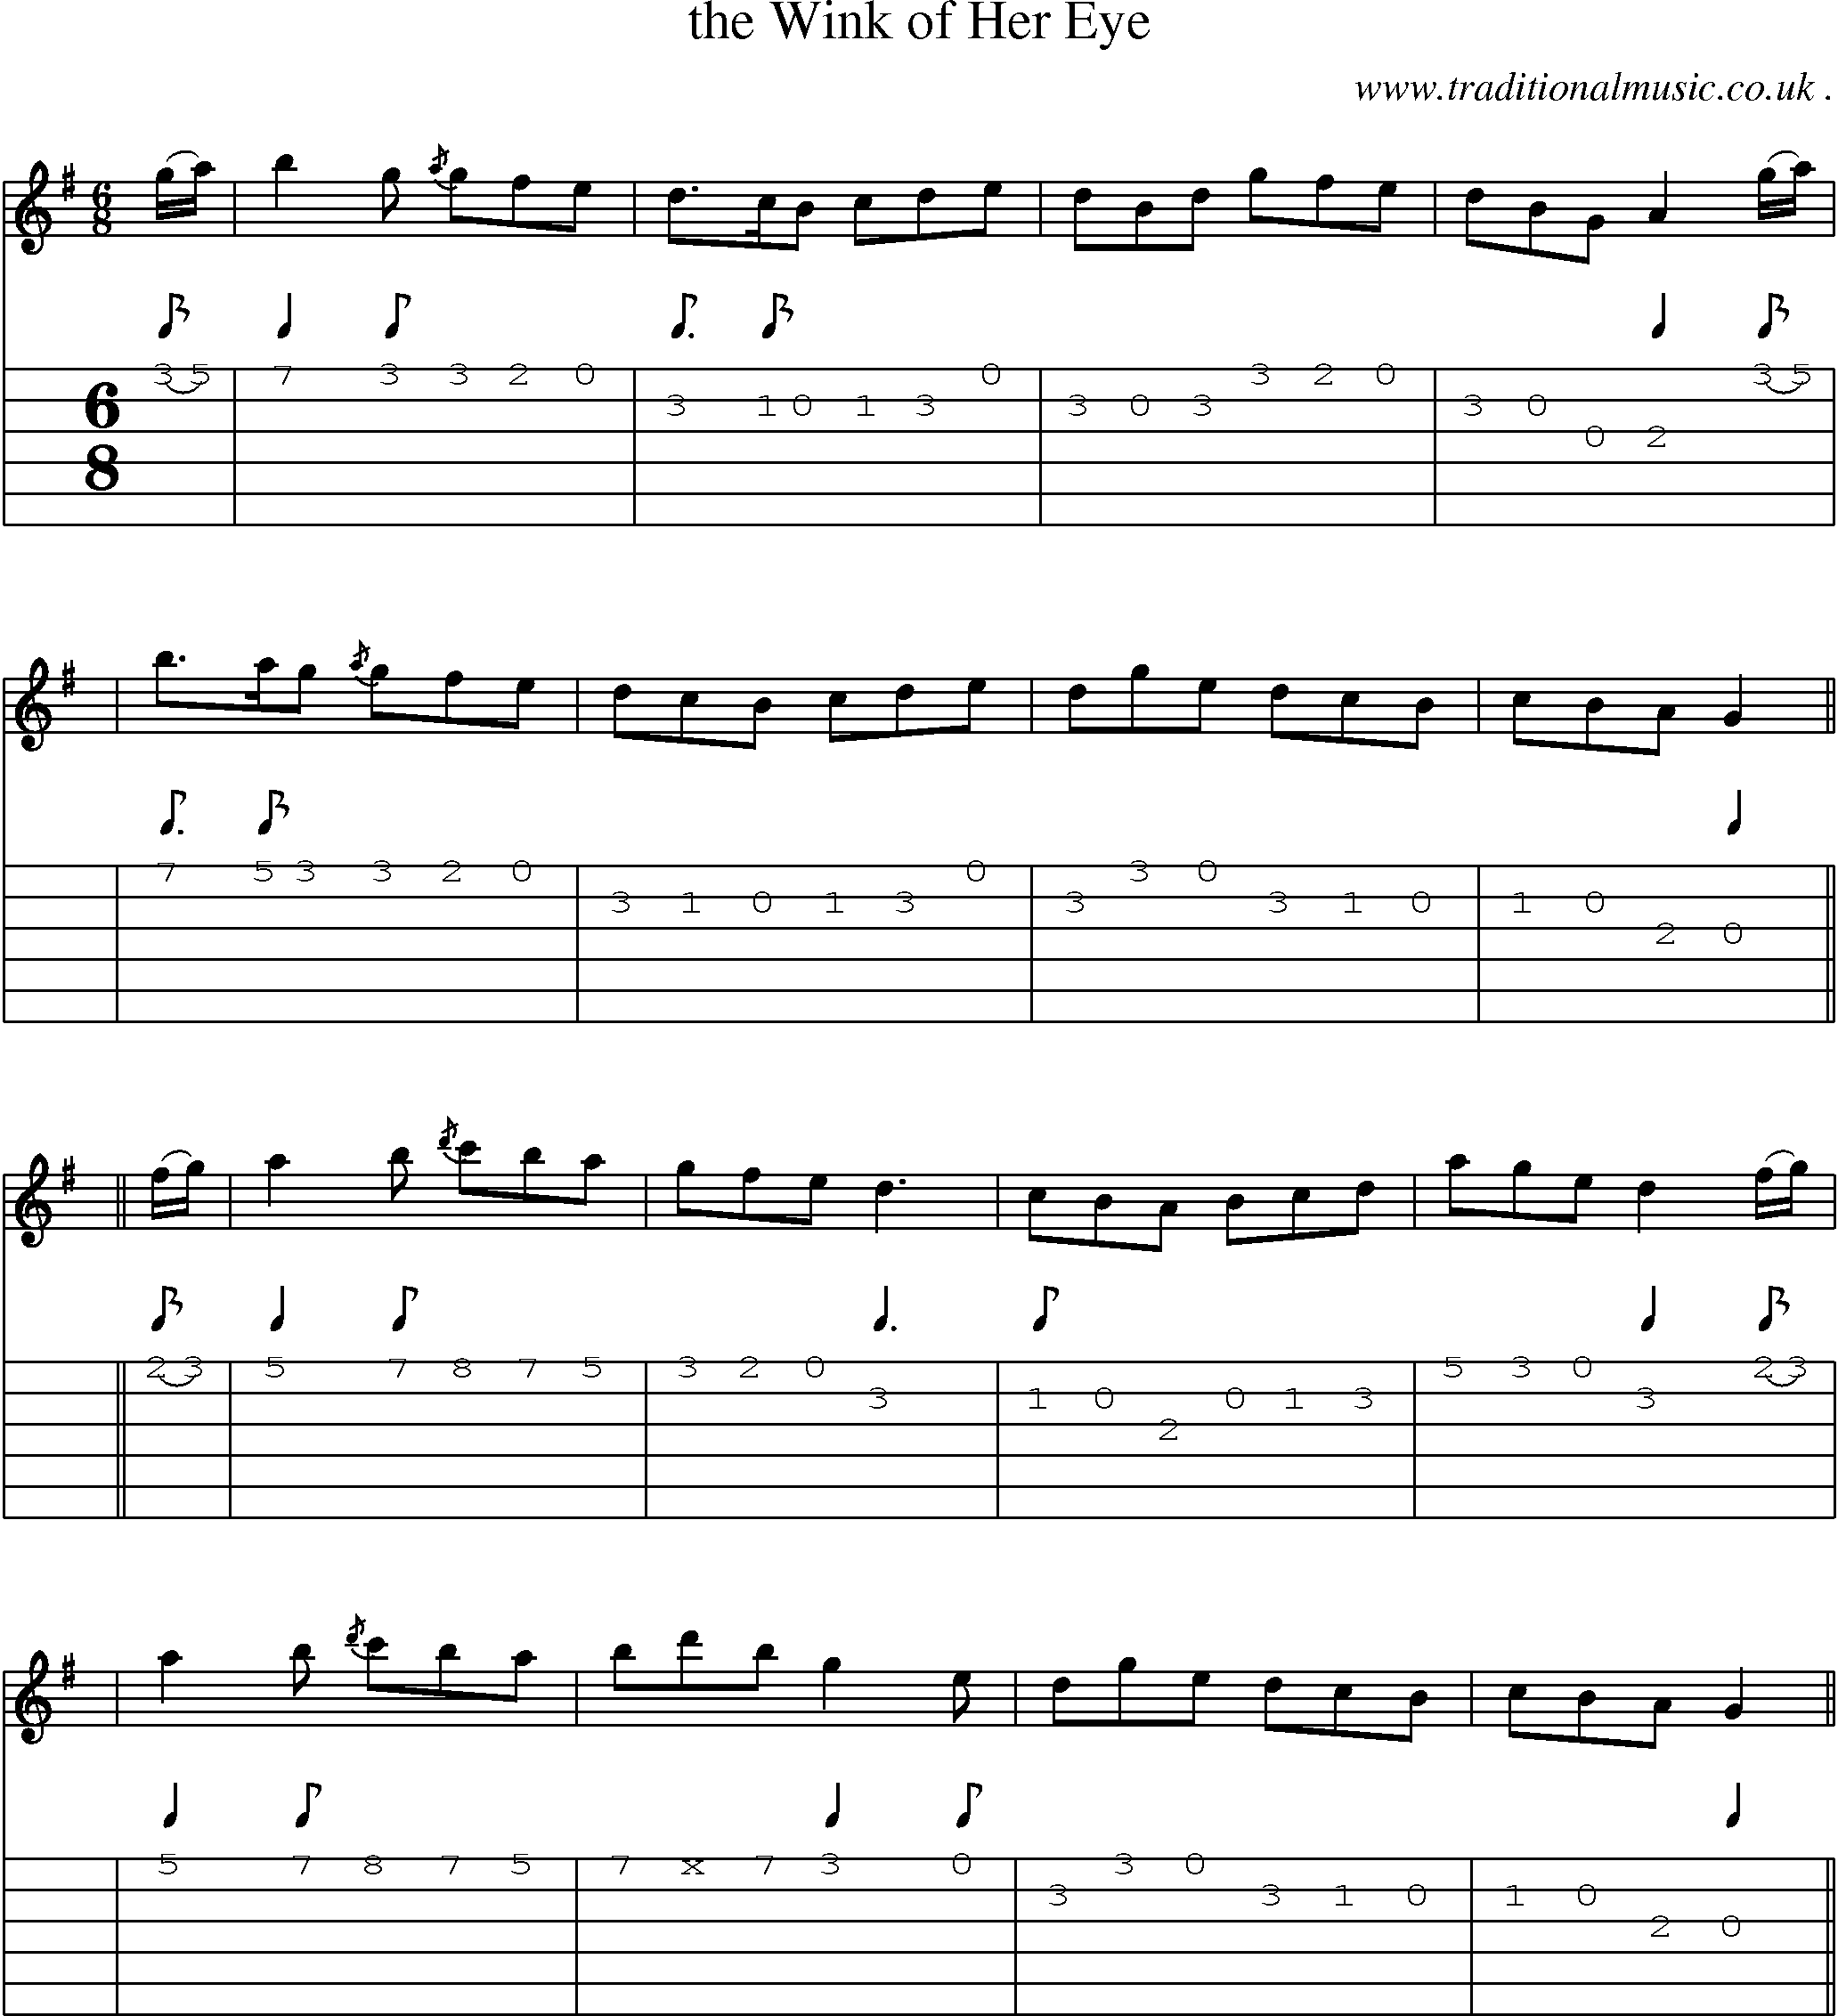 Sheet-music  score, Chords and Guitar Tabs for The Wink Of Her Eye